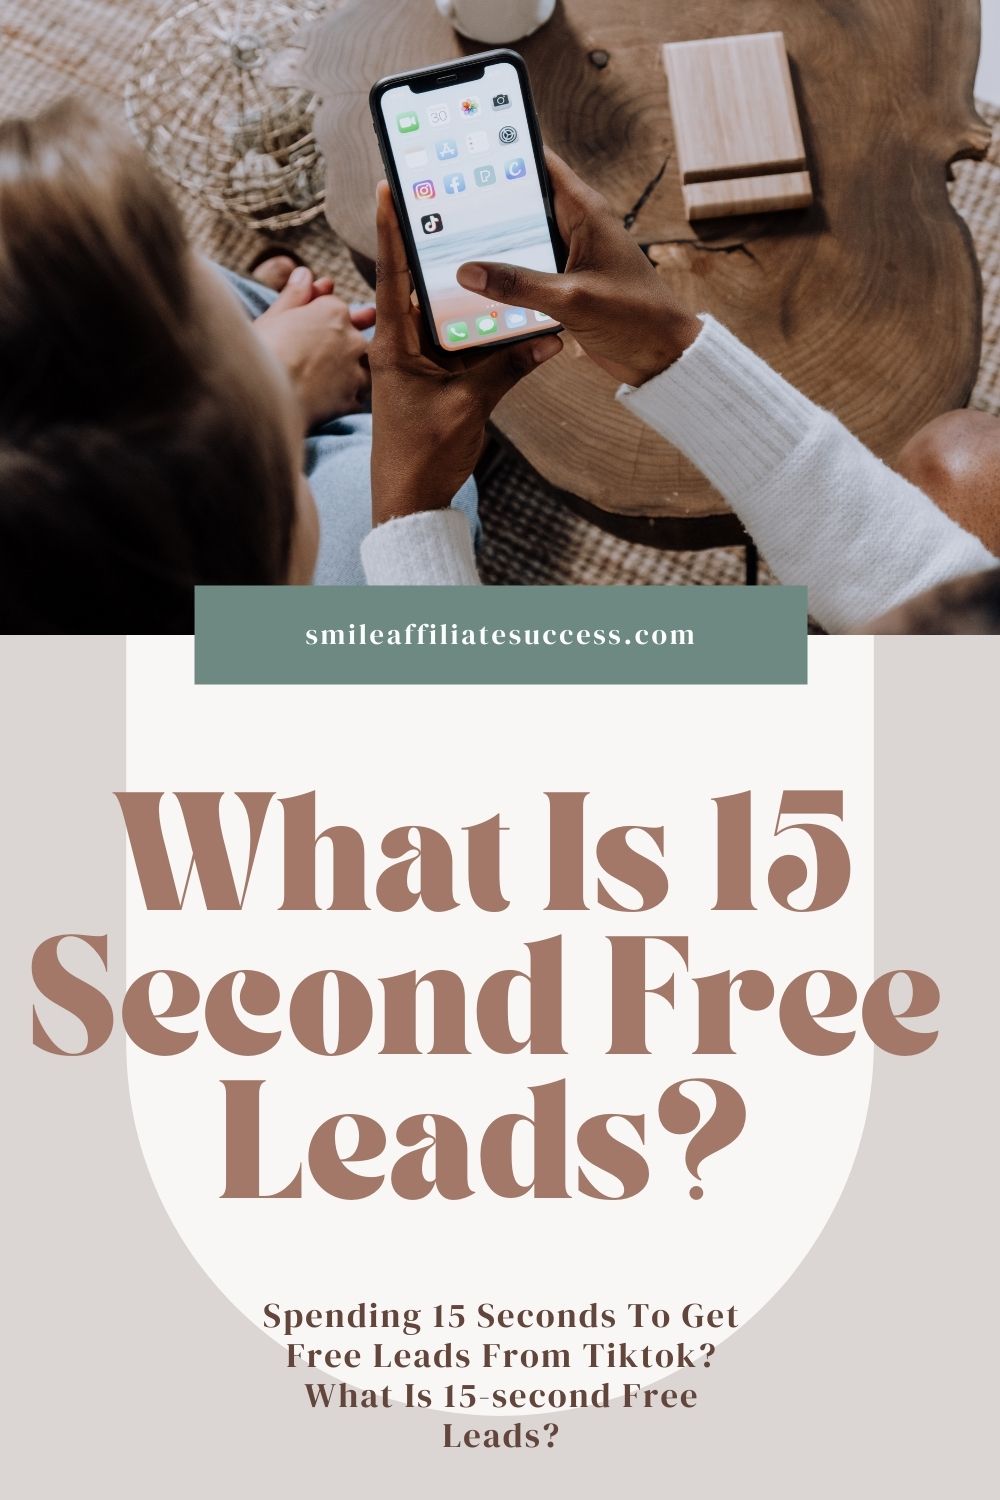 What Is 15 Second Free Leads?